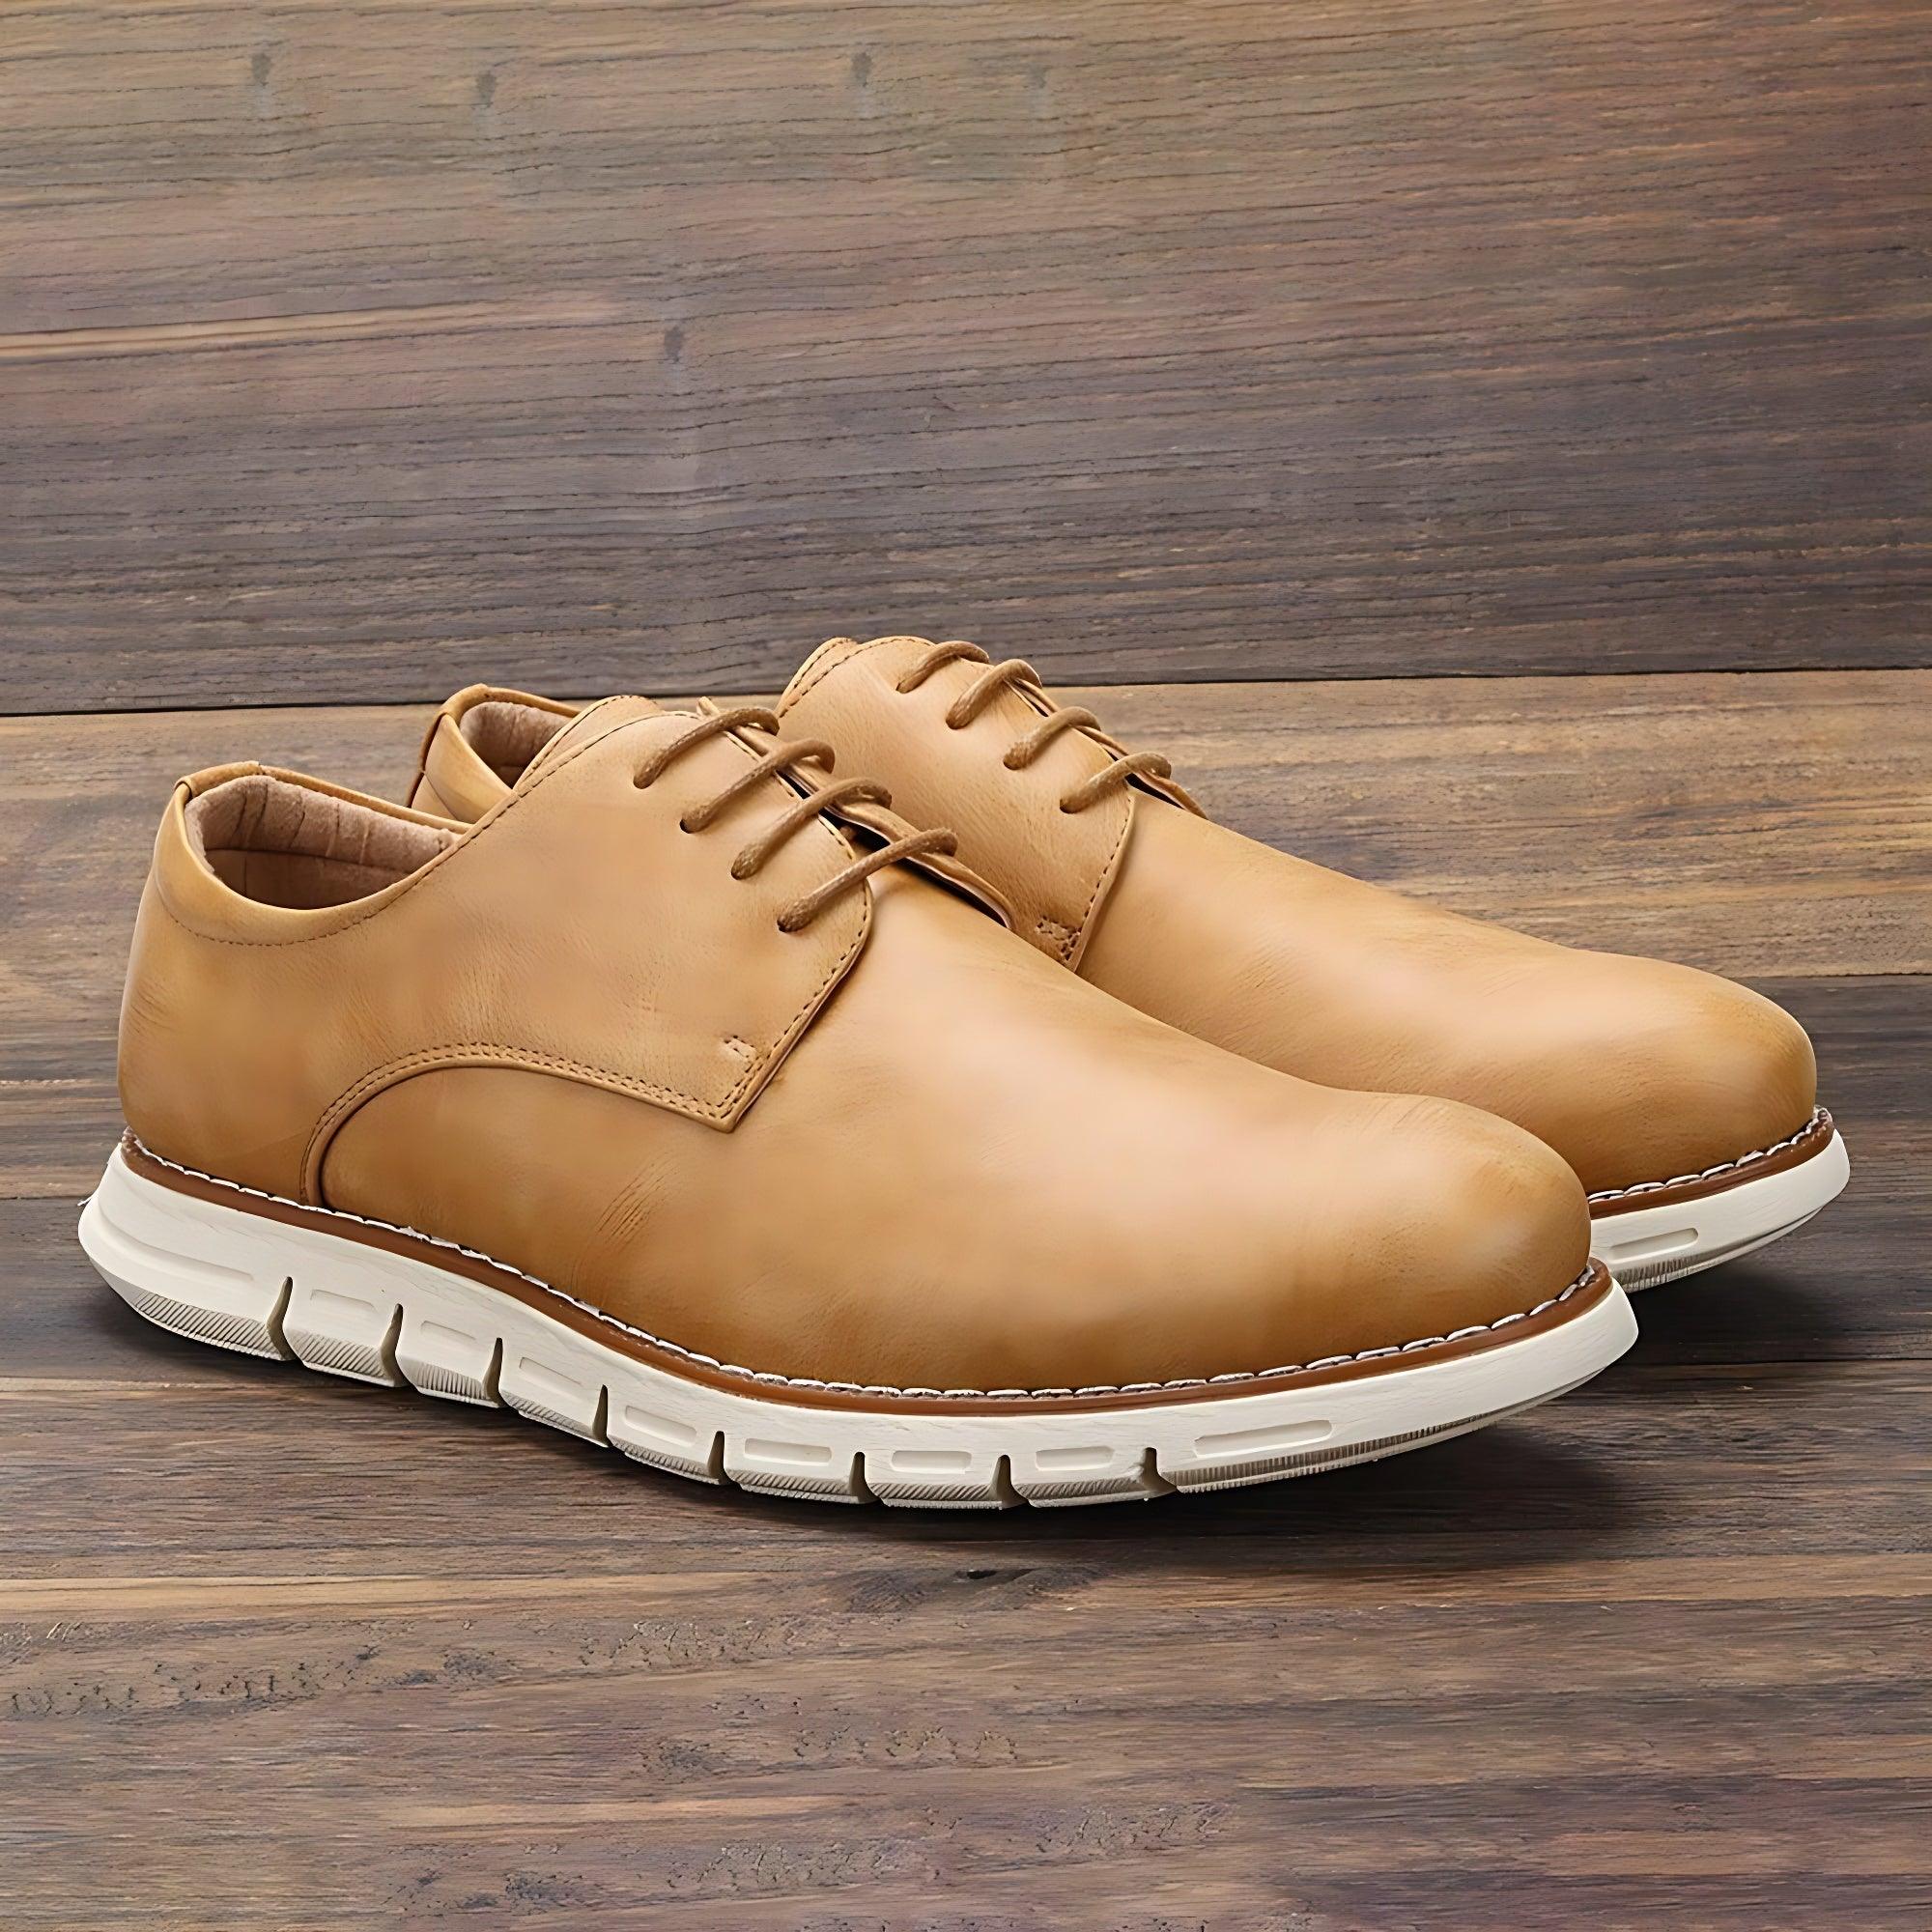 Best Business Casual Shoes Men's - Touchy Style .